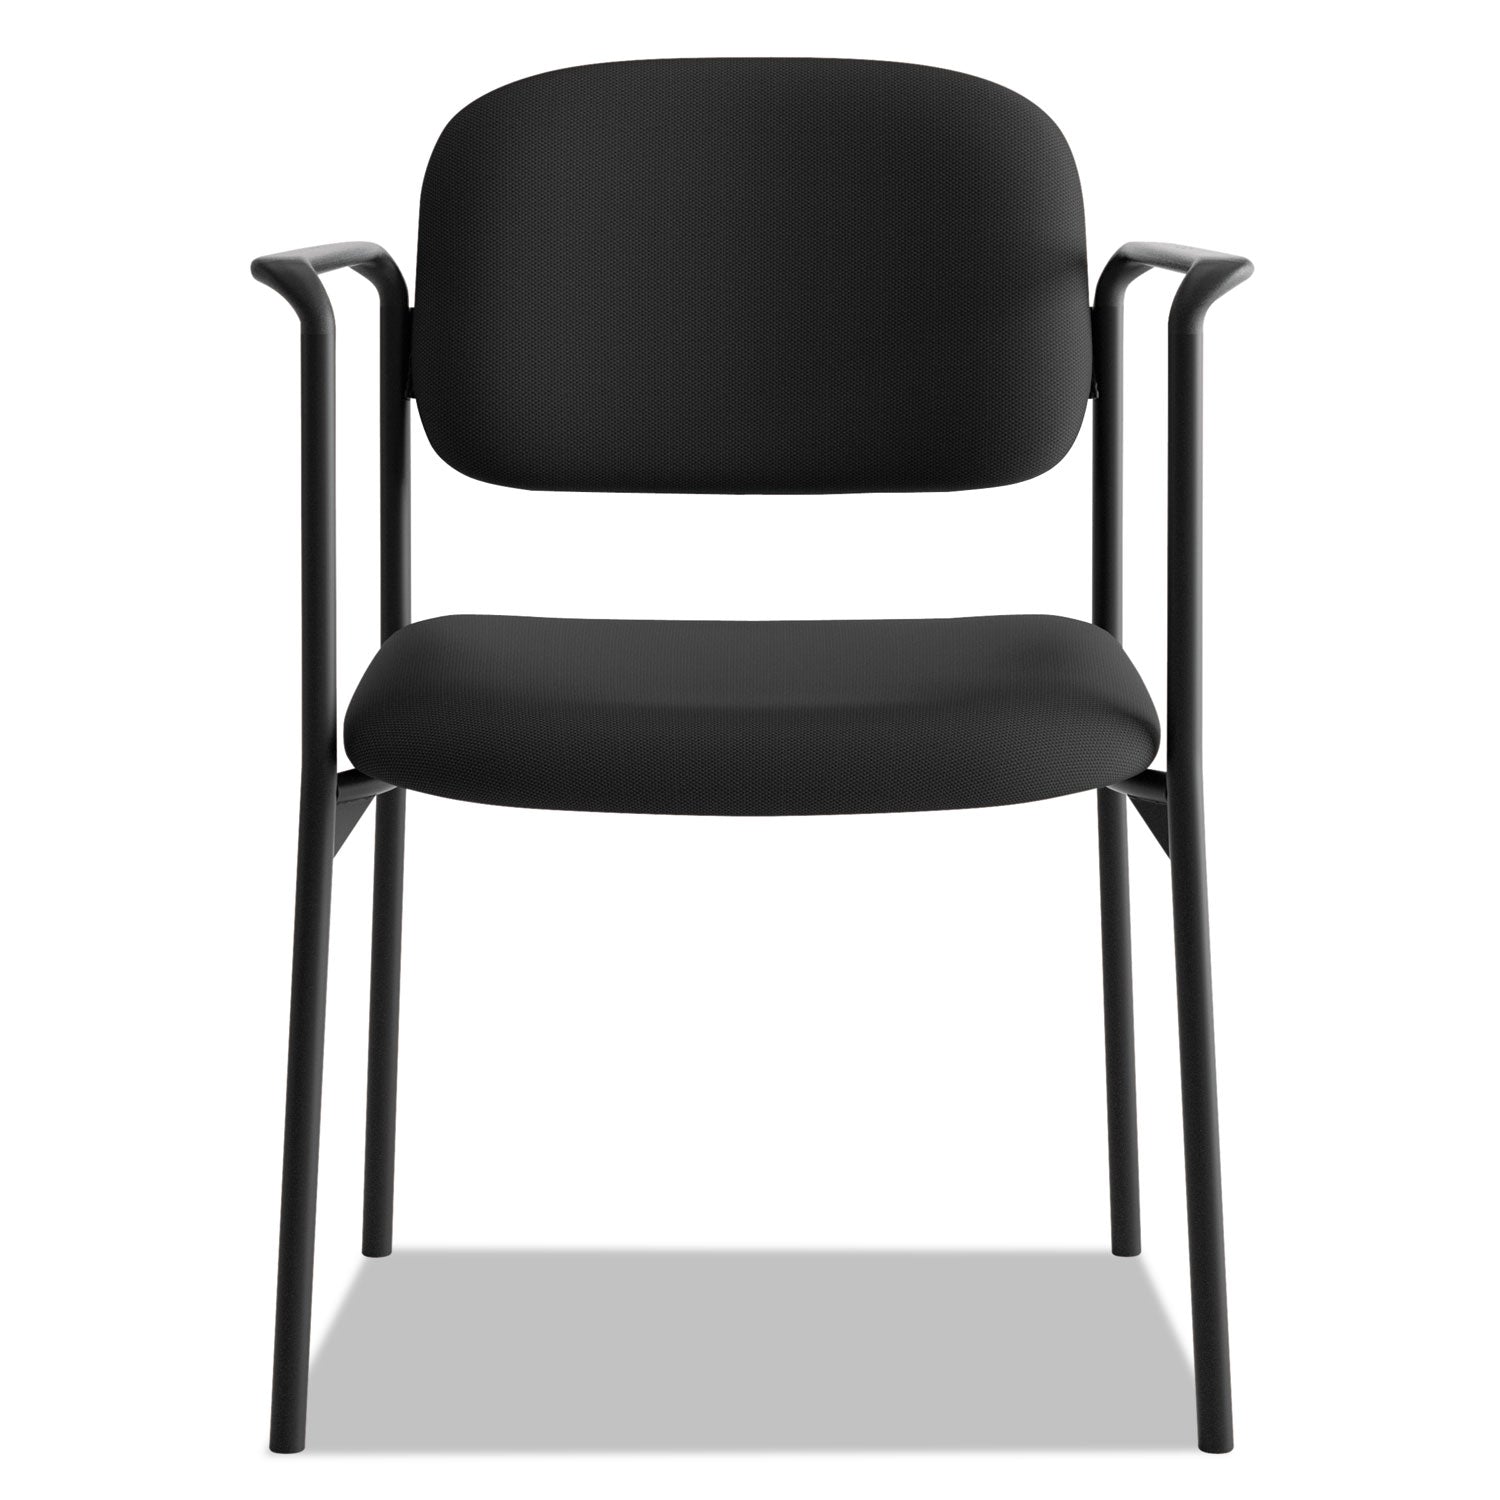 VL616 Stacking Guest Chair with Arms, Fabric Upholstery, 23.25" x 21" x 32.75", Black Seat, Black Back, Black Base - 